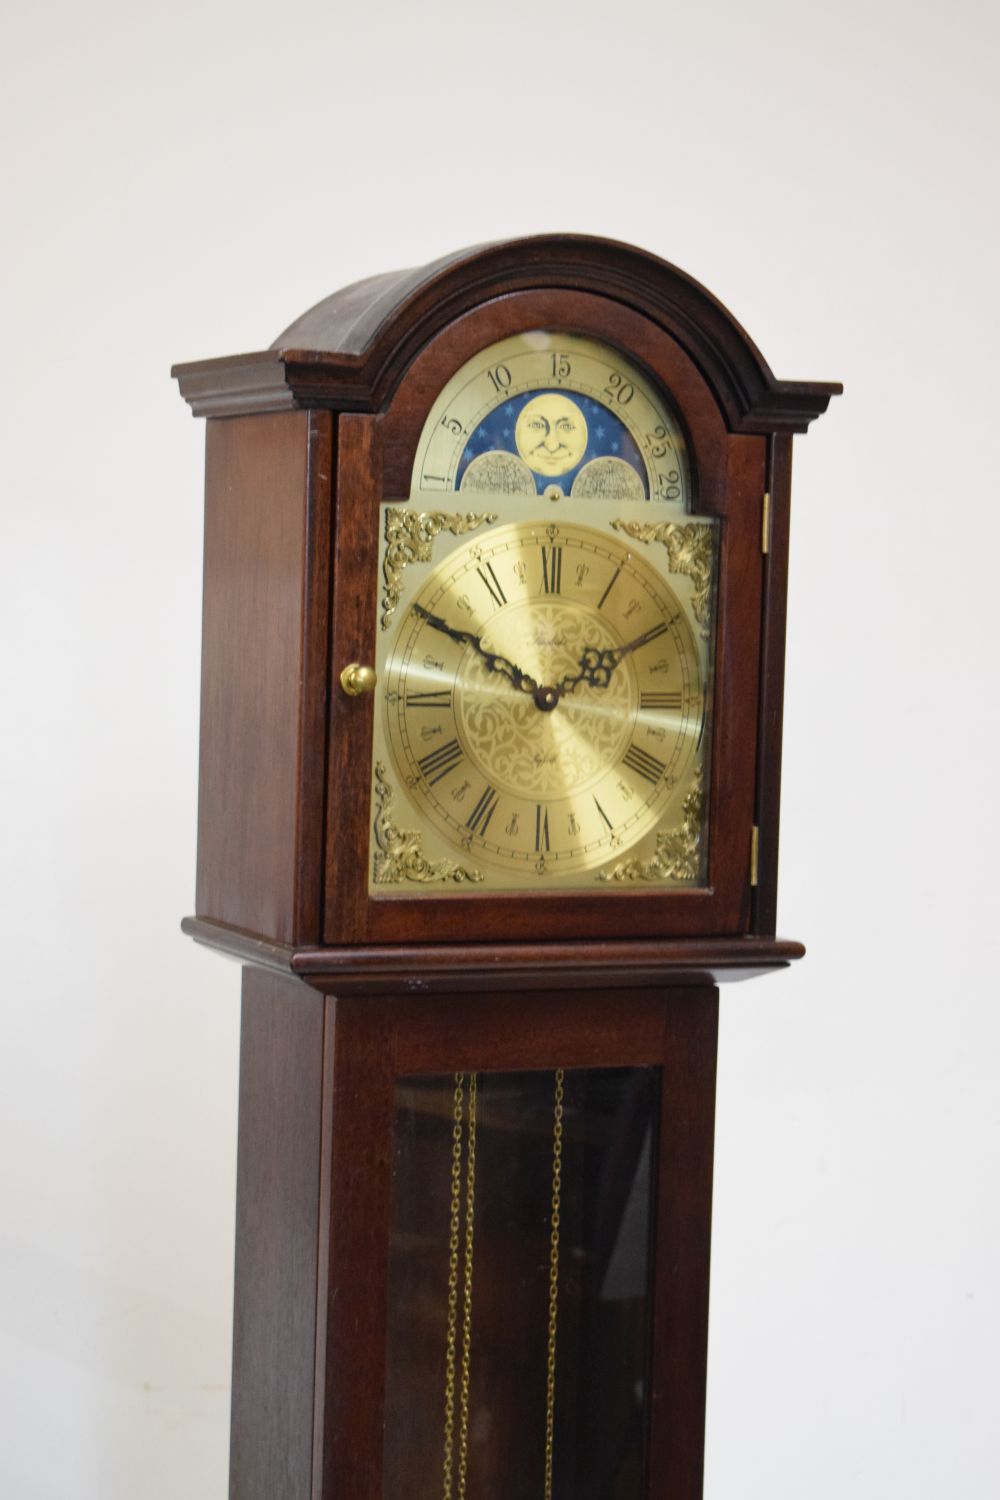 Reproduction mahogany cased chiming grandmother clock by Fenclocks, Suffolk, 179.5cm high